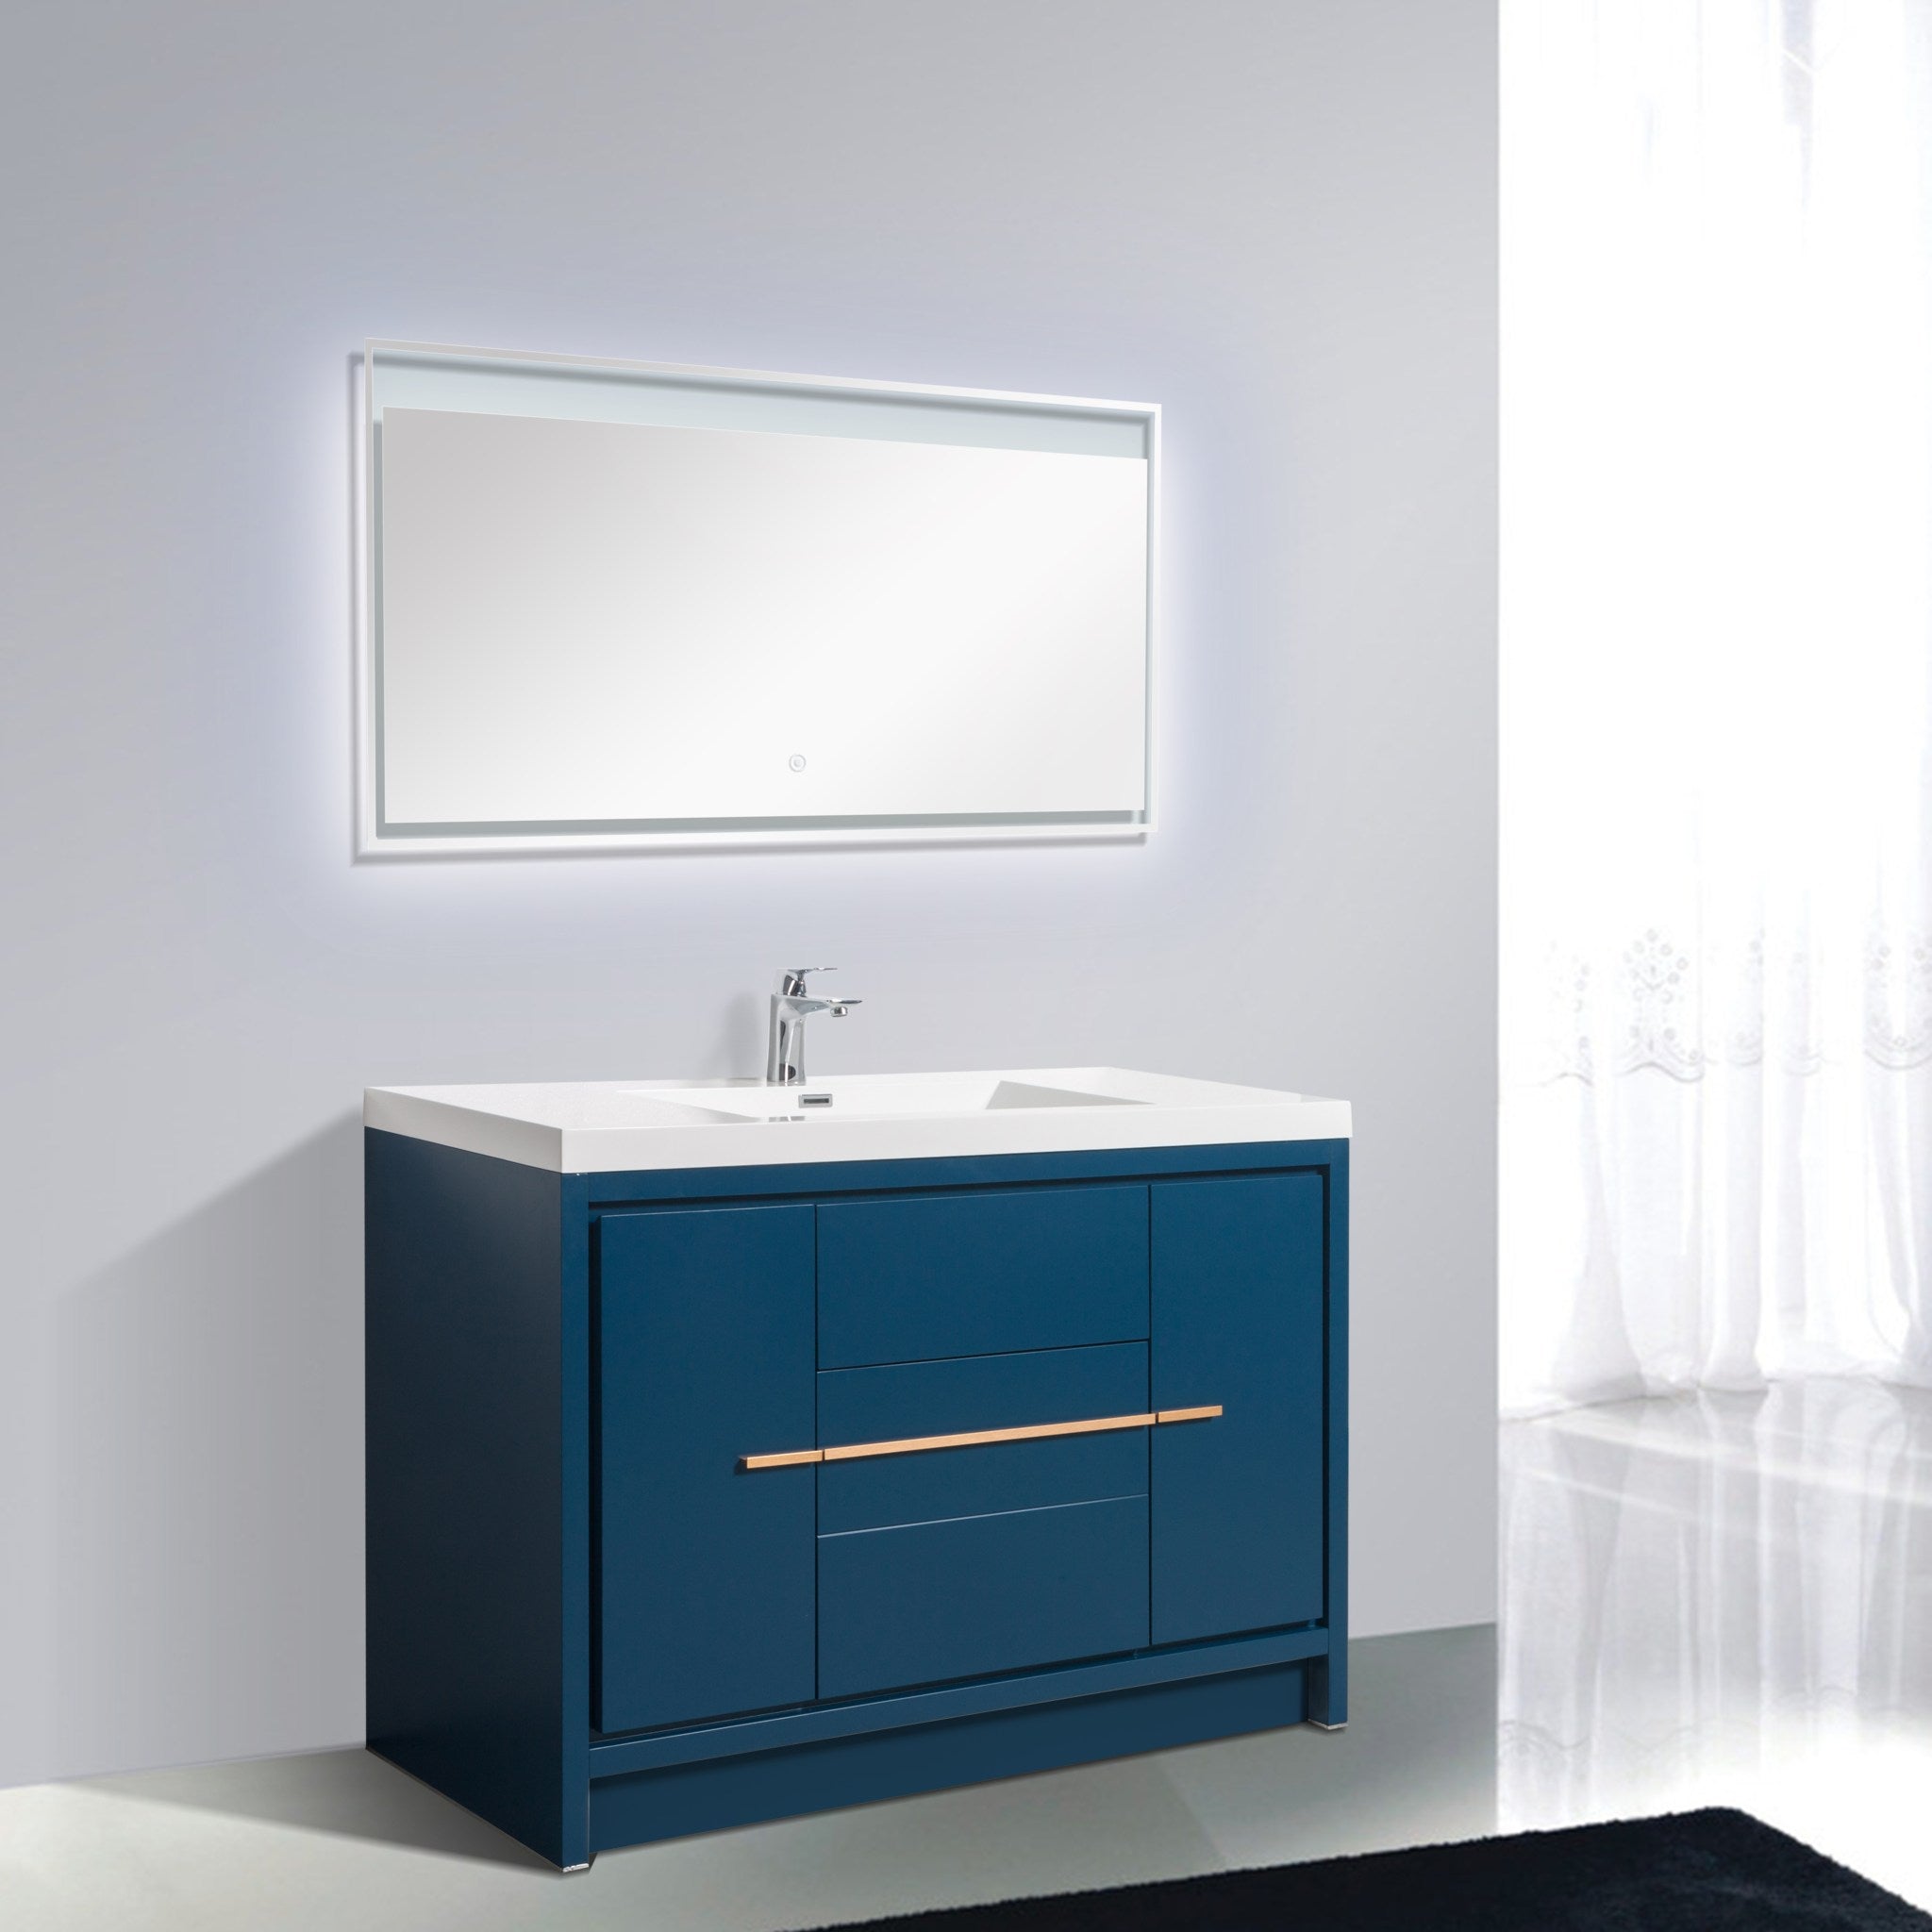 Granada 47.5 Matte Blue With Brush Rose Gold Handle Cabinet, Square Cultured Marble Sink, Free Standing Modern Vanity Set